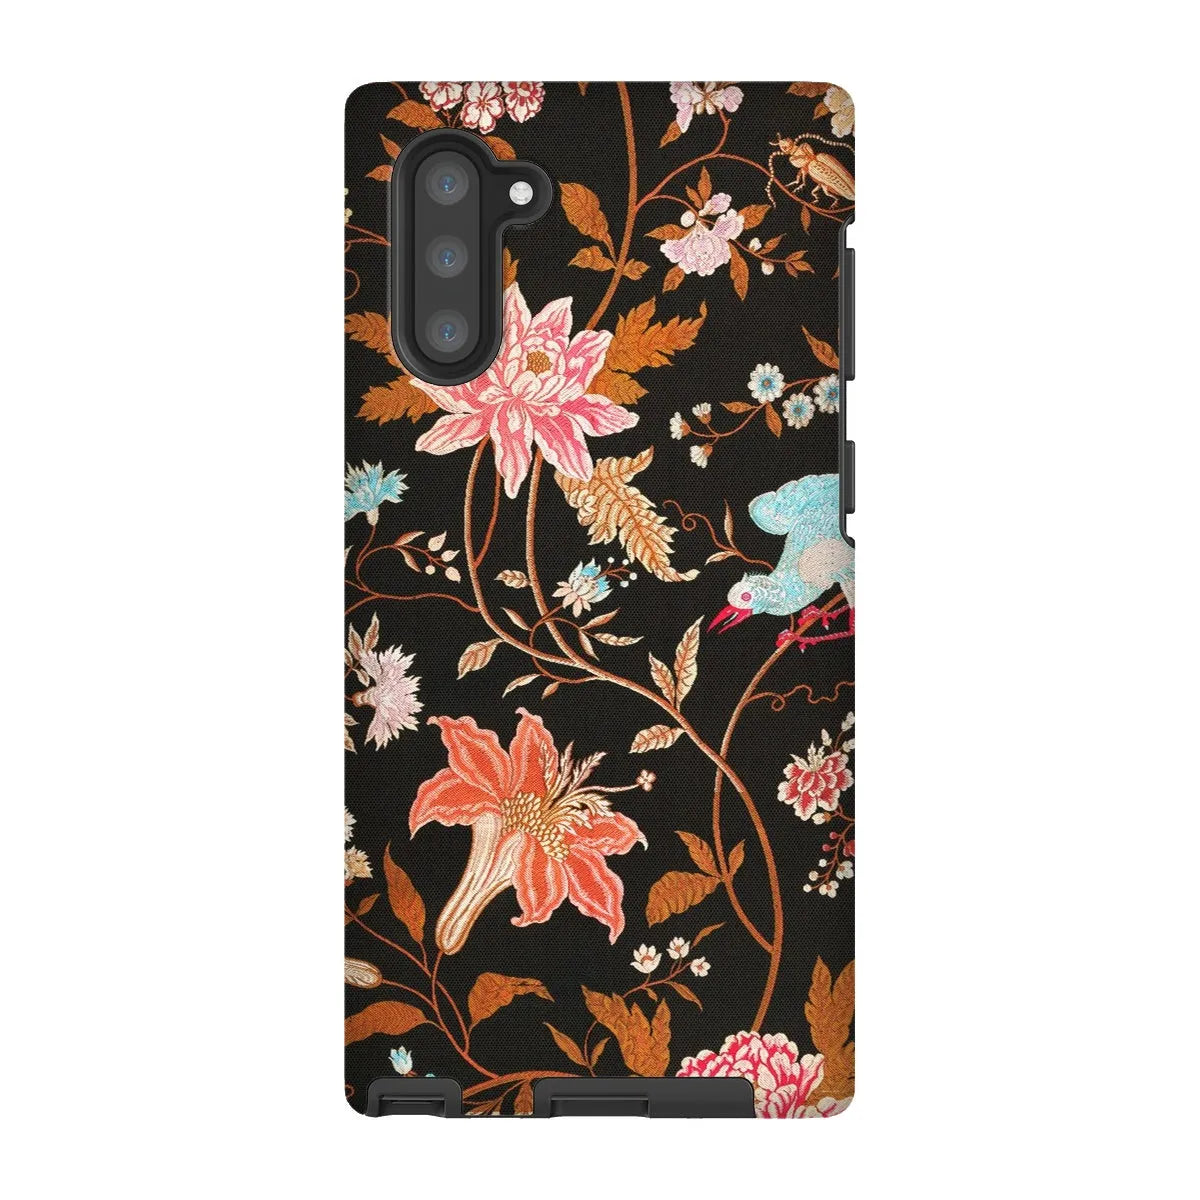 Midnight Call - Indian Aesthetic Fabric Art Phone Case - Samsung Galaxy Note 10 / Matte - Mobile Phone Cases